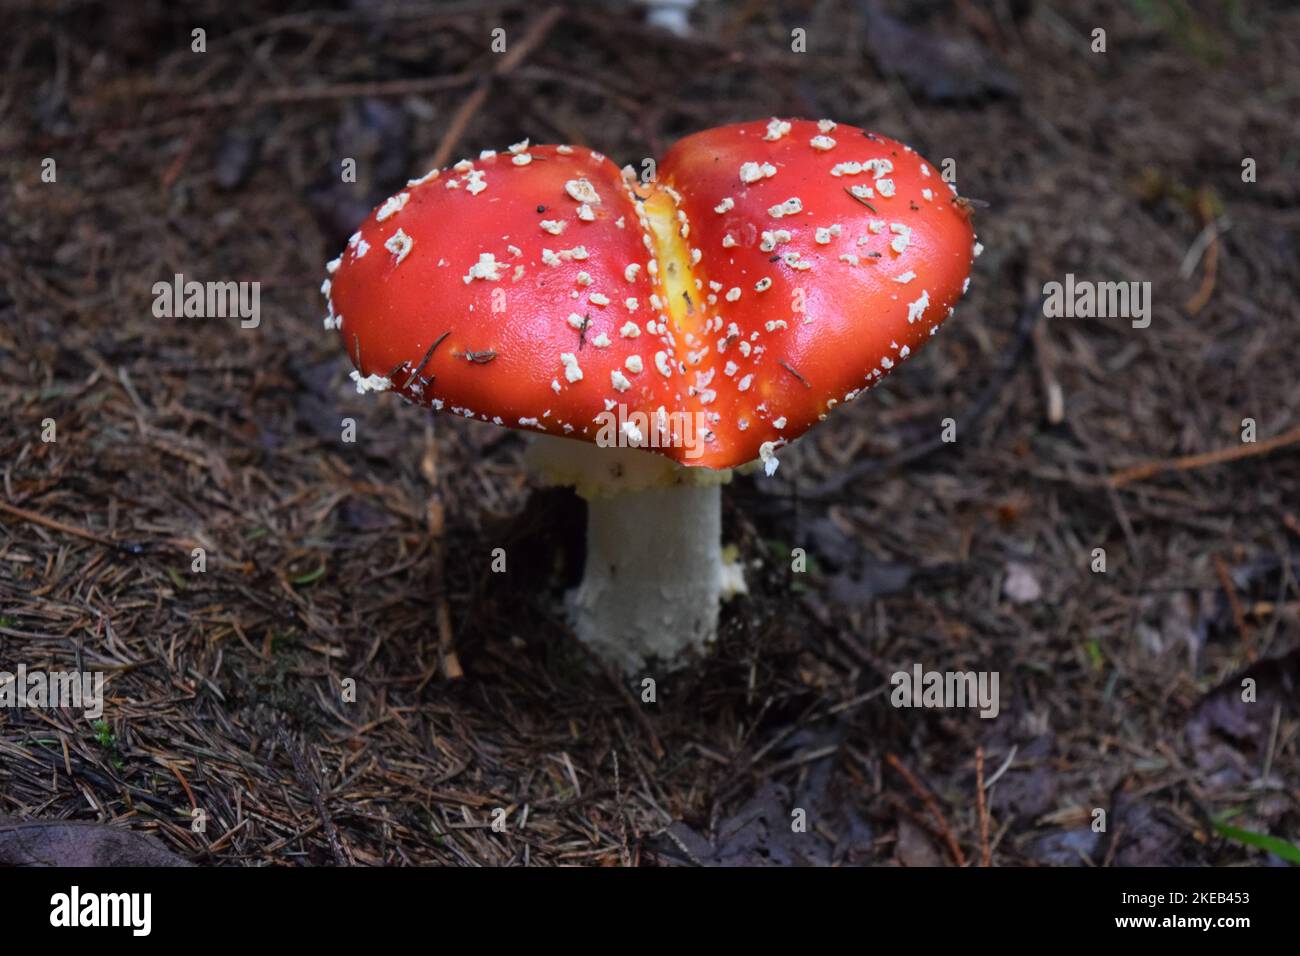 Amanita muscaria red mushroom in the carpathian forest, a well-known red-capped mushroom covered in white scaly bumps. It is poisonous if consumed. Stock Photo